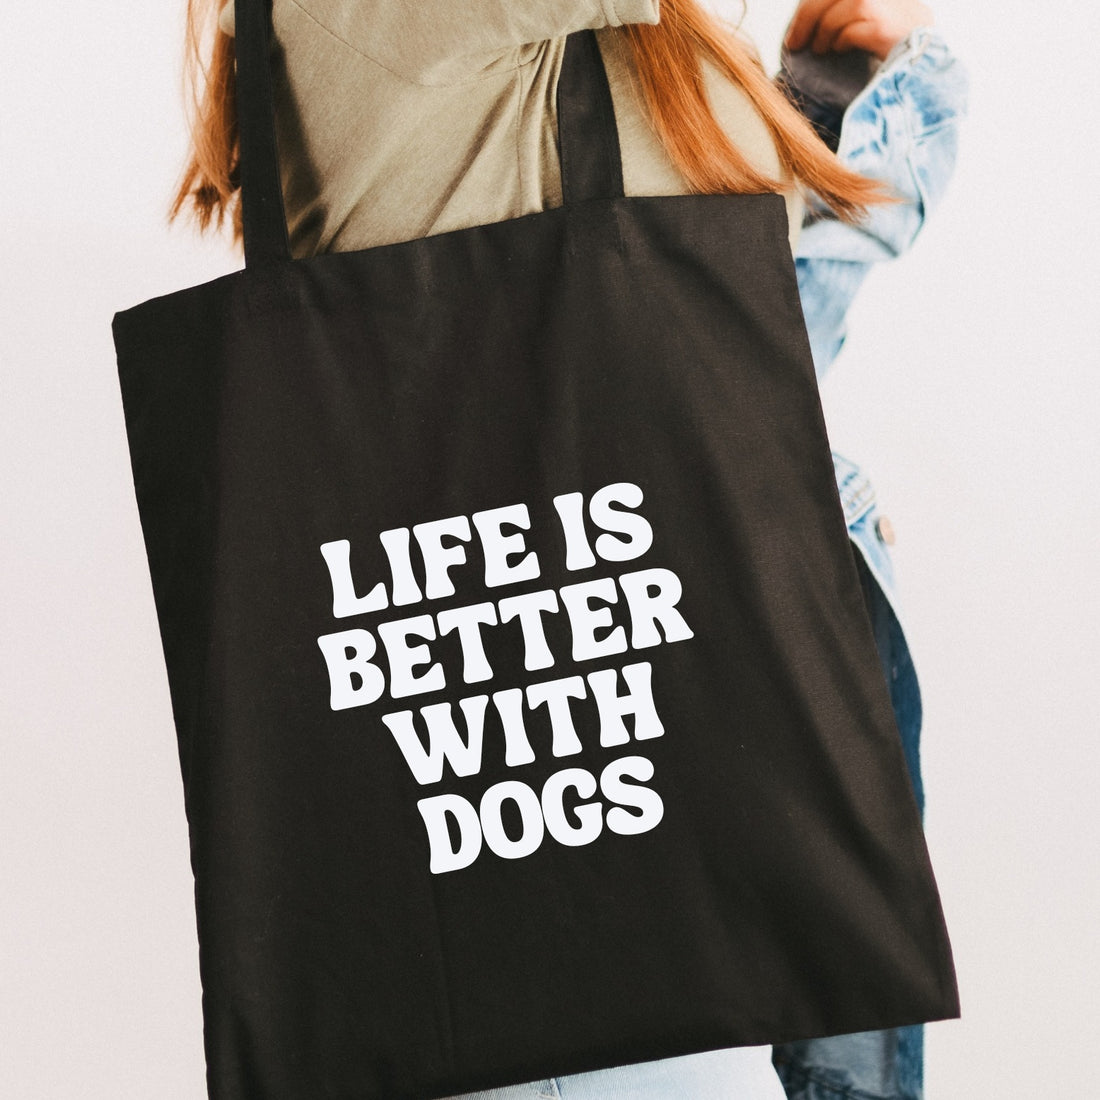 Life is better with Dogs Tote